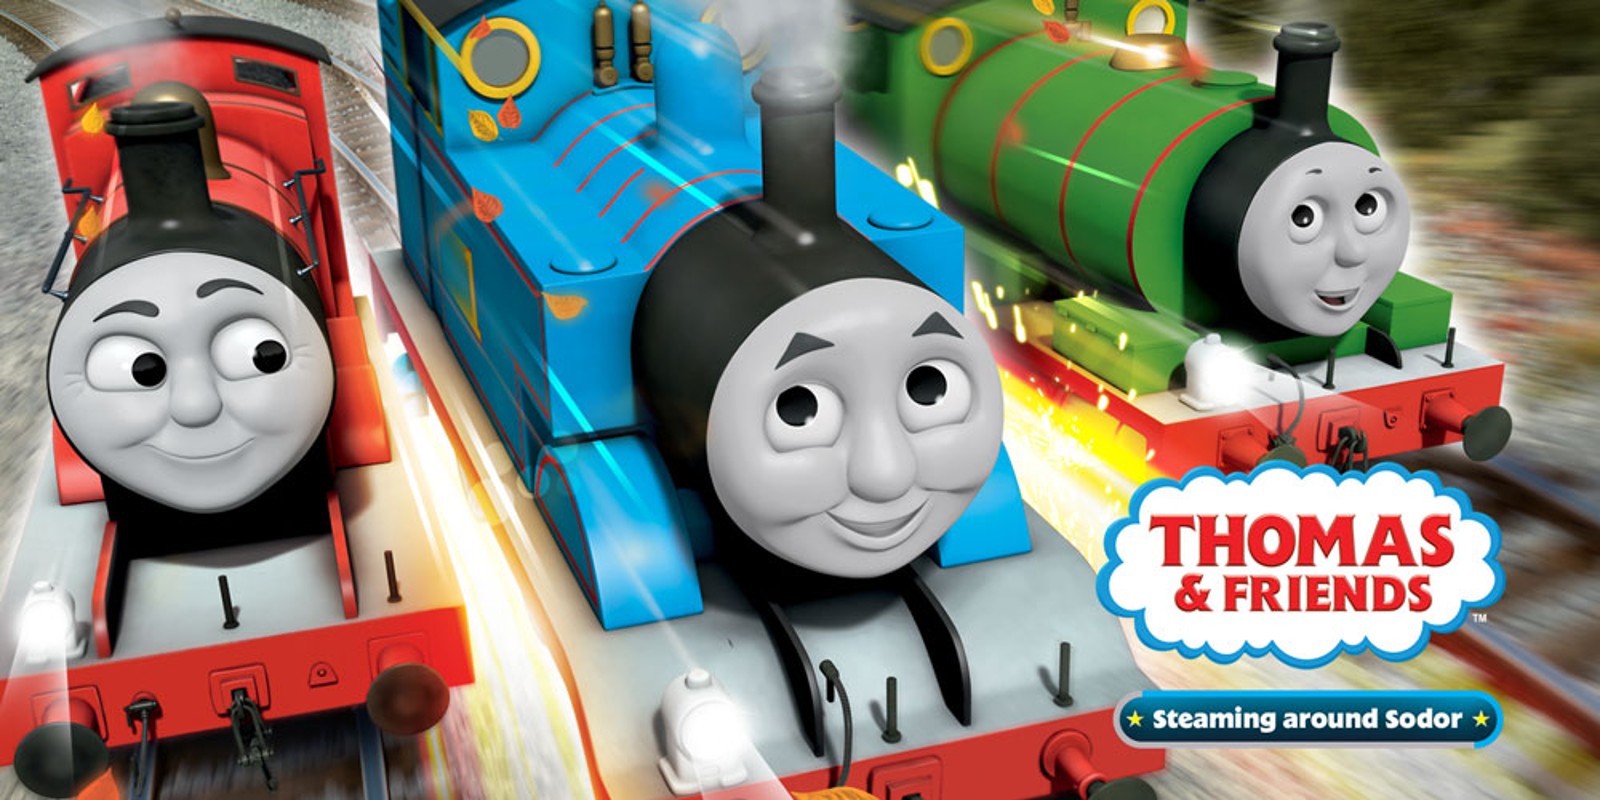 thomas and friends wii game